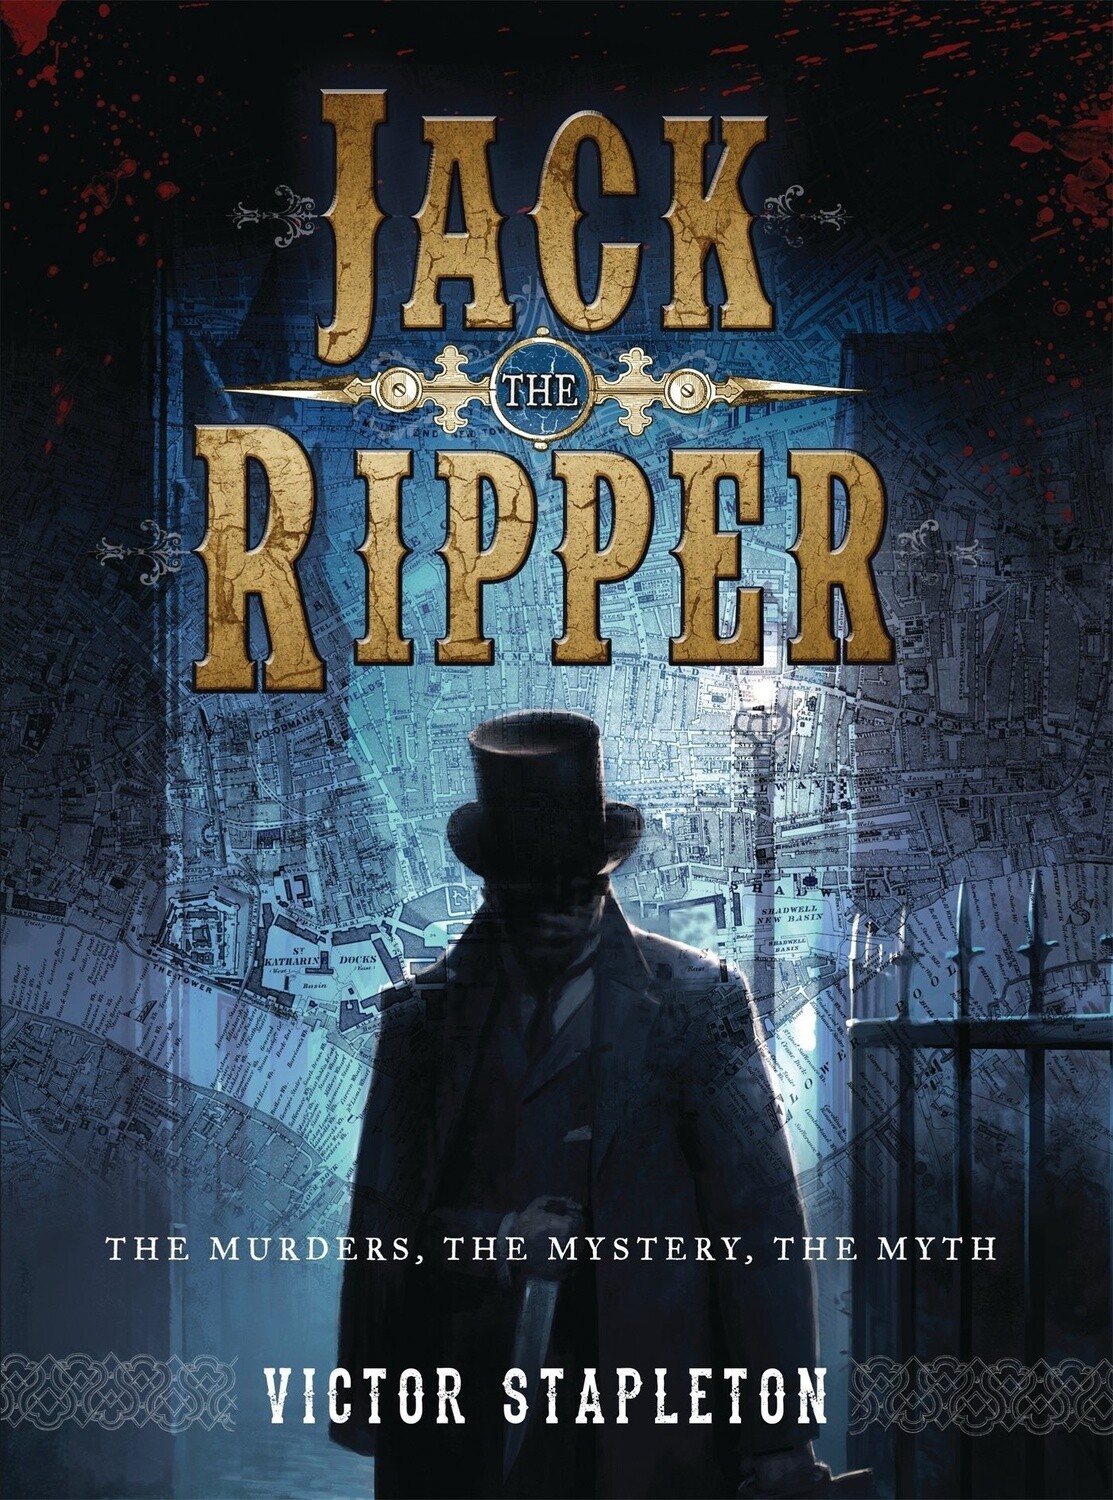 Jack the Ripper: The Murder, the Mystery, the Myth